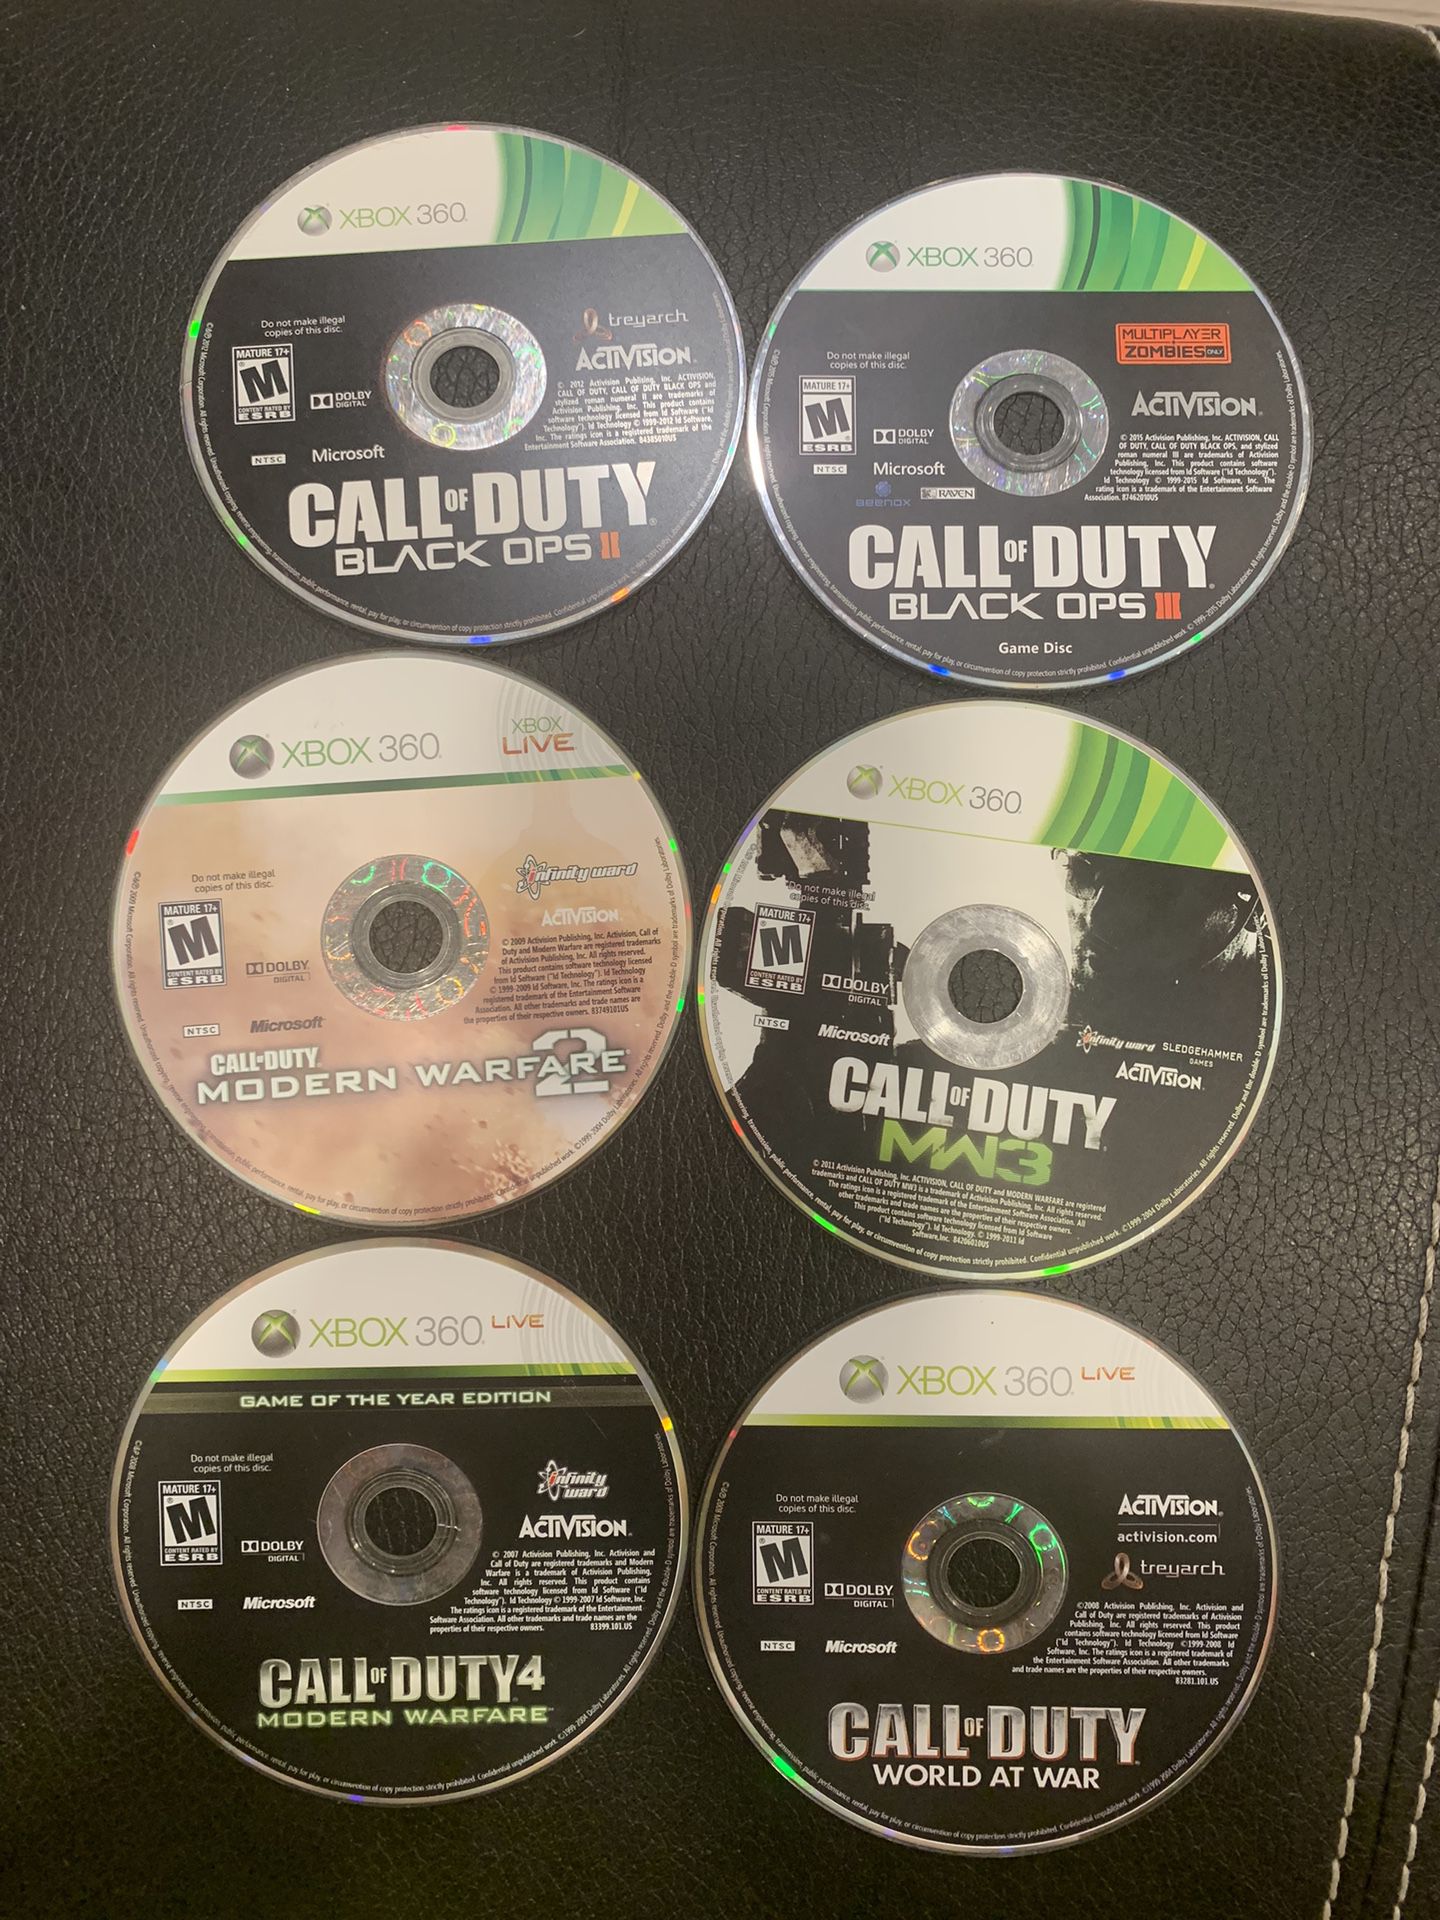 Xbox 360 Call Of Duty Game (6) Bundle - Discs Only (Tested)  - Fast Shipping!